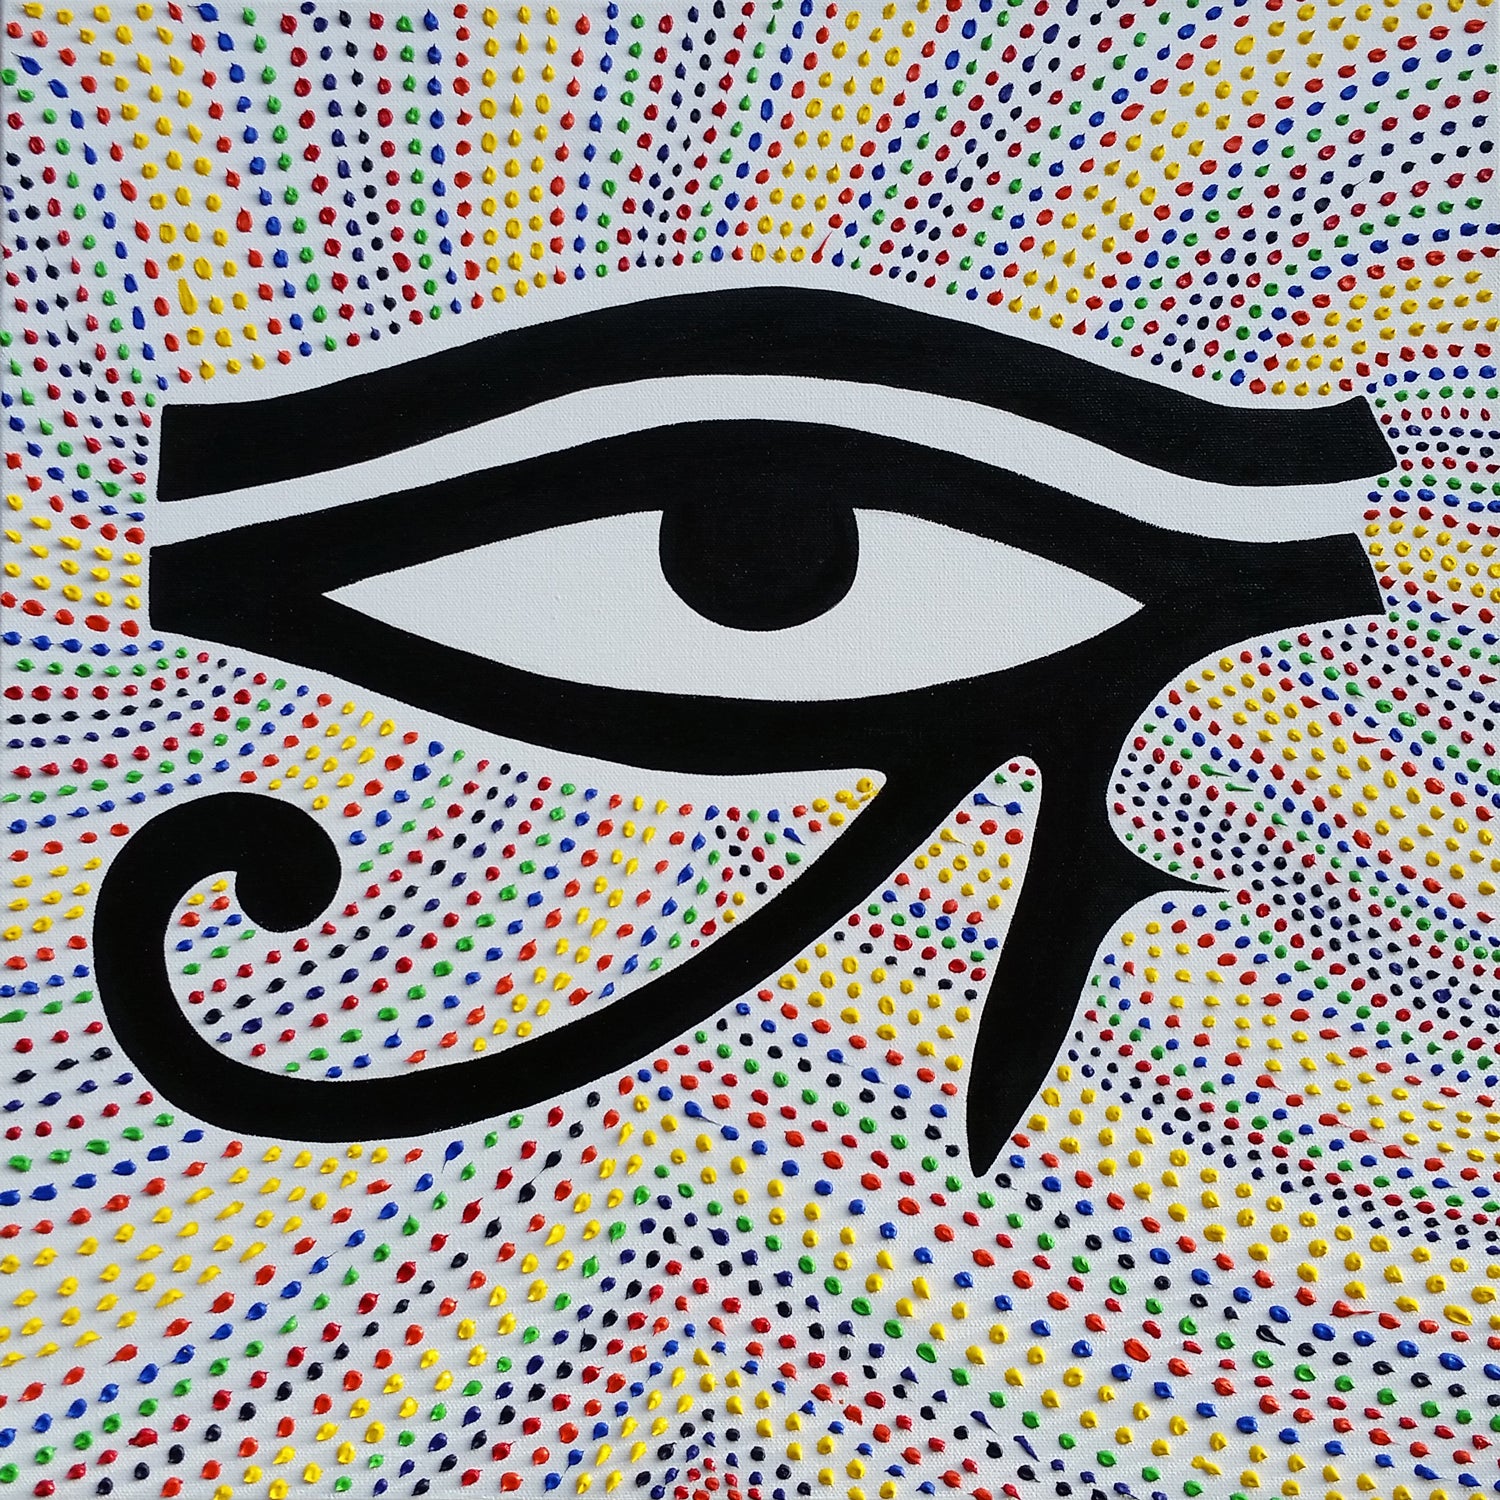 Third-Eye-Abstract-Expressionism-Art-Contemporary-Modern-Painting-Eye-of-Horus-Egyptian-Motif-Symbol-Acrylic-Canvas-Painting